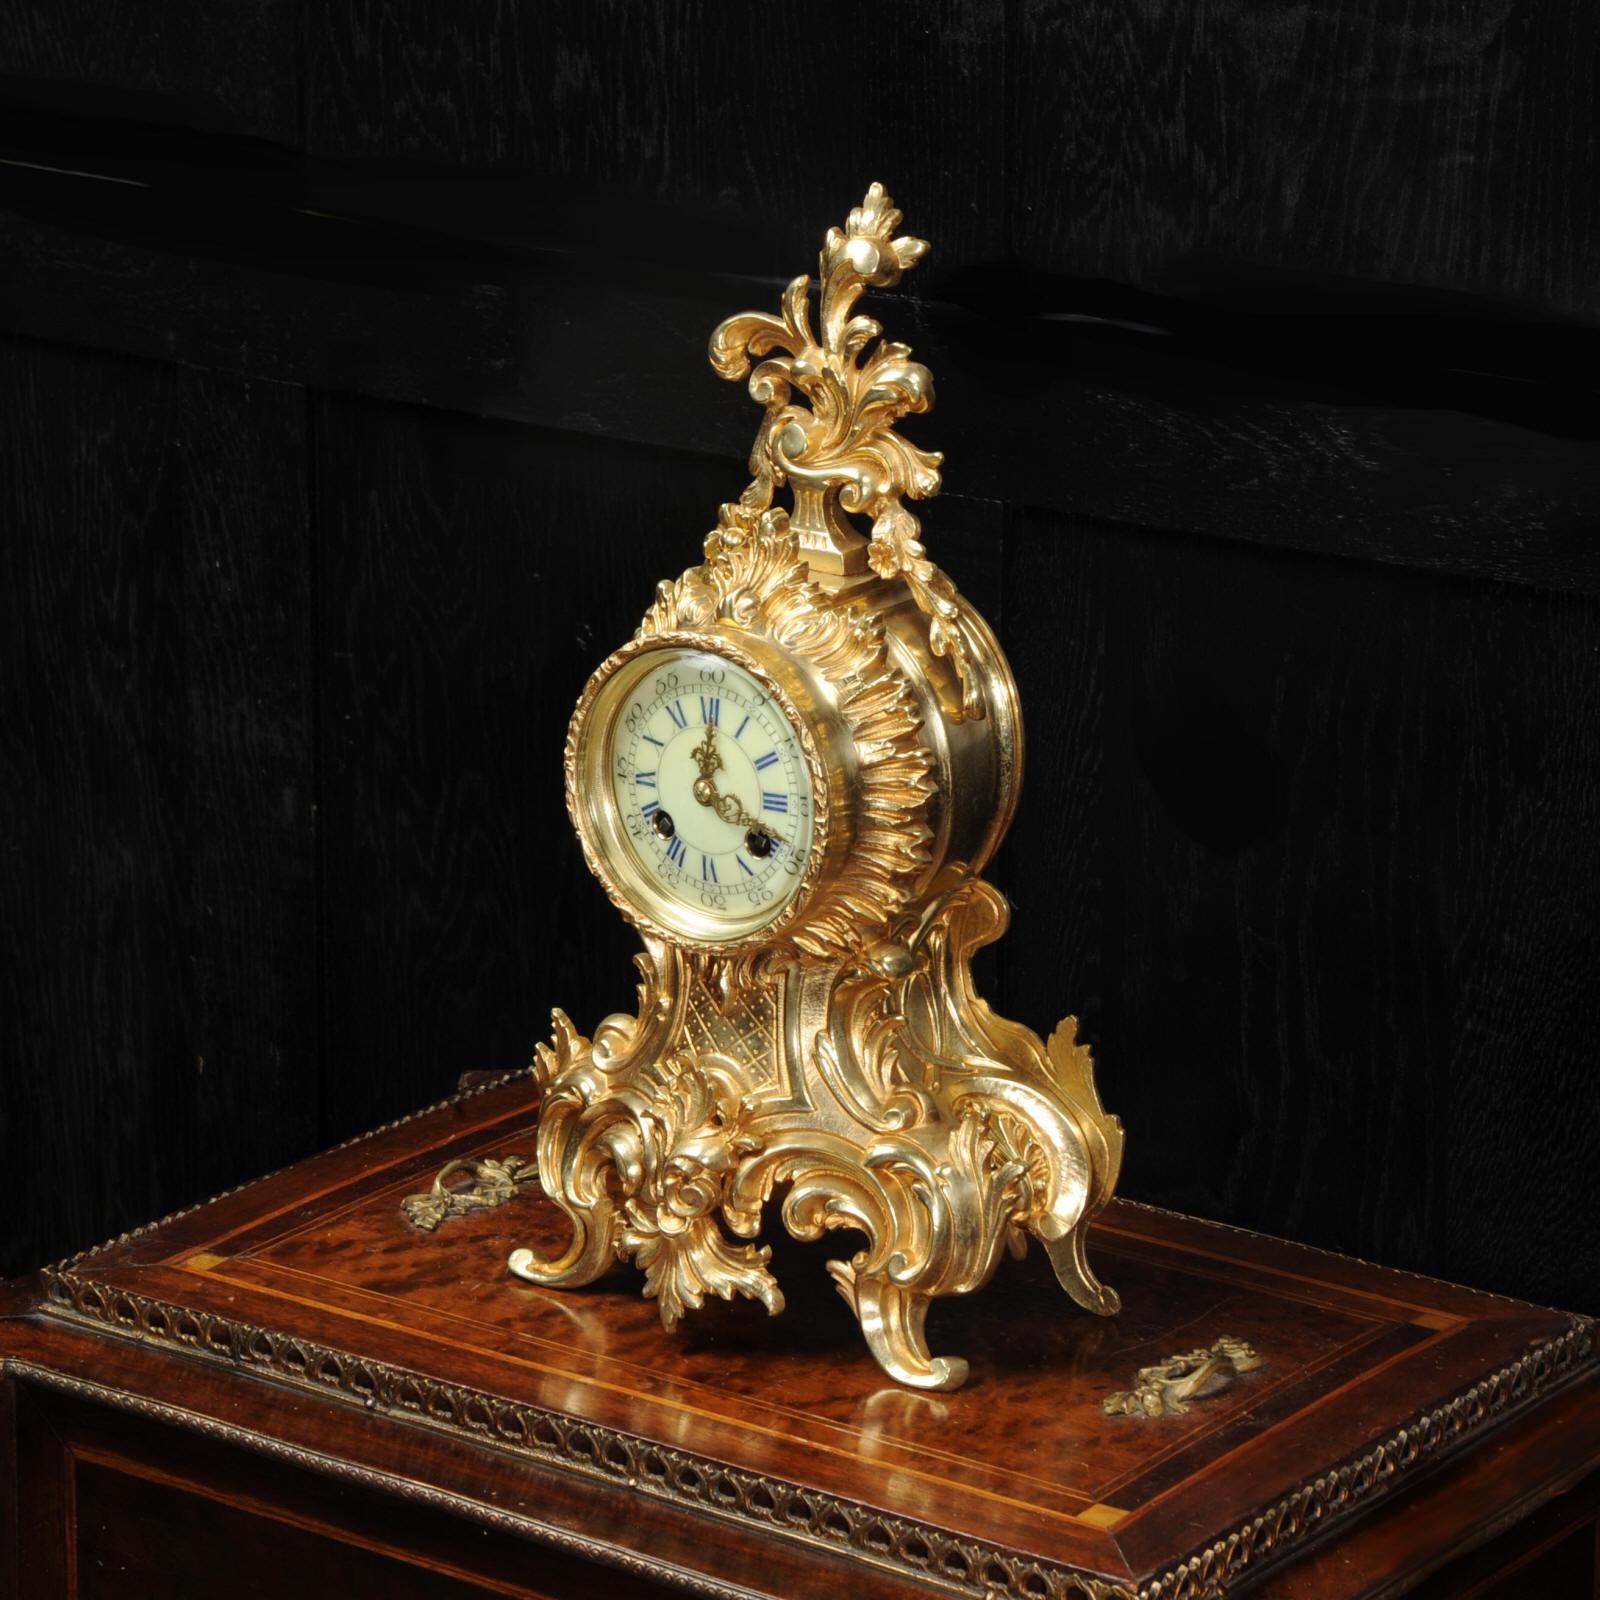 A lovely original antique French Rococo boudoir clock, circa 1880. Modelled in gilt brass and typically bold, waisted design with laurel leaves, 'C' scrolls and floral swags. There is a large and elaborate acanthus finial to the top of the case. The